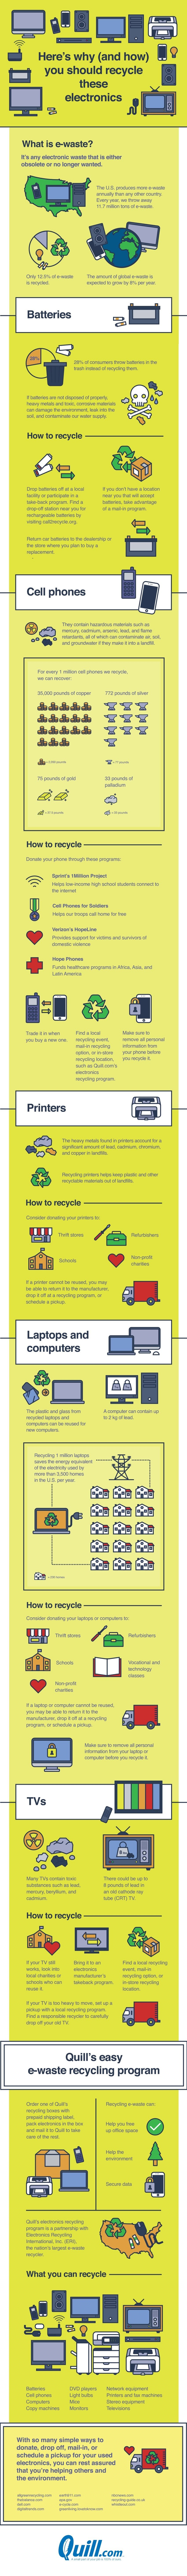 How to Recycle Electronics And Why You Should - #infographic